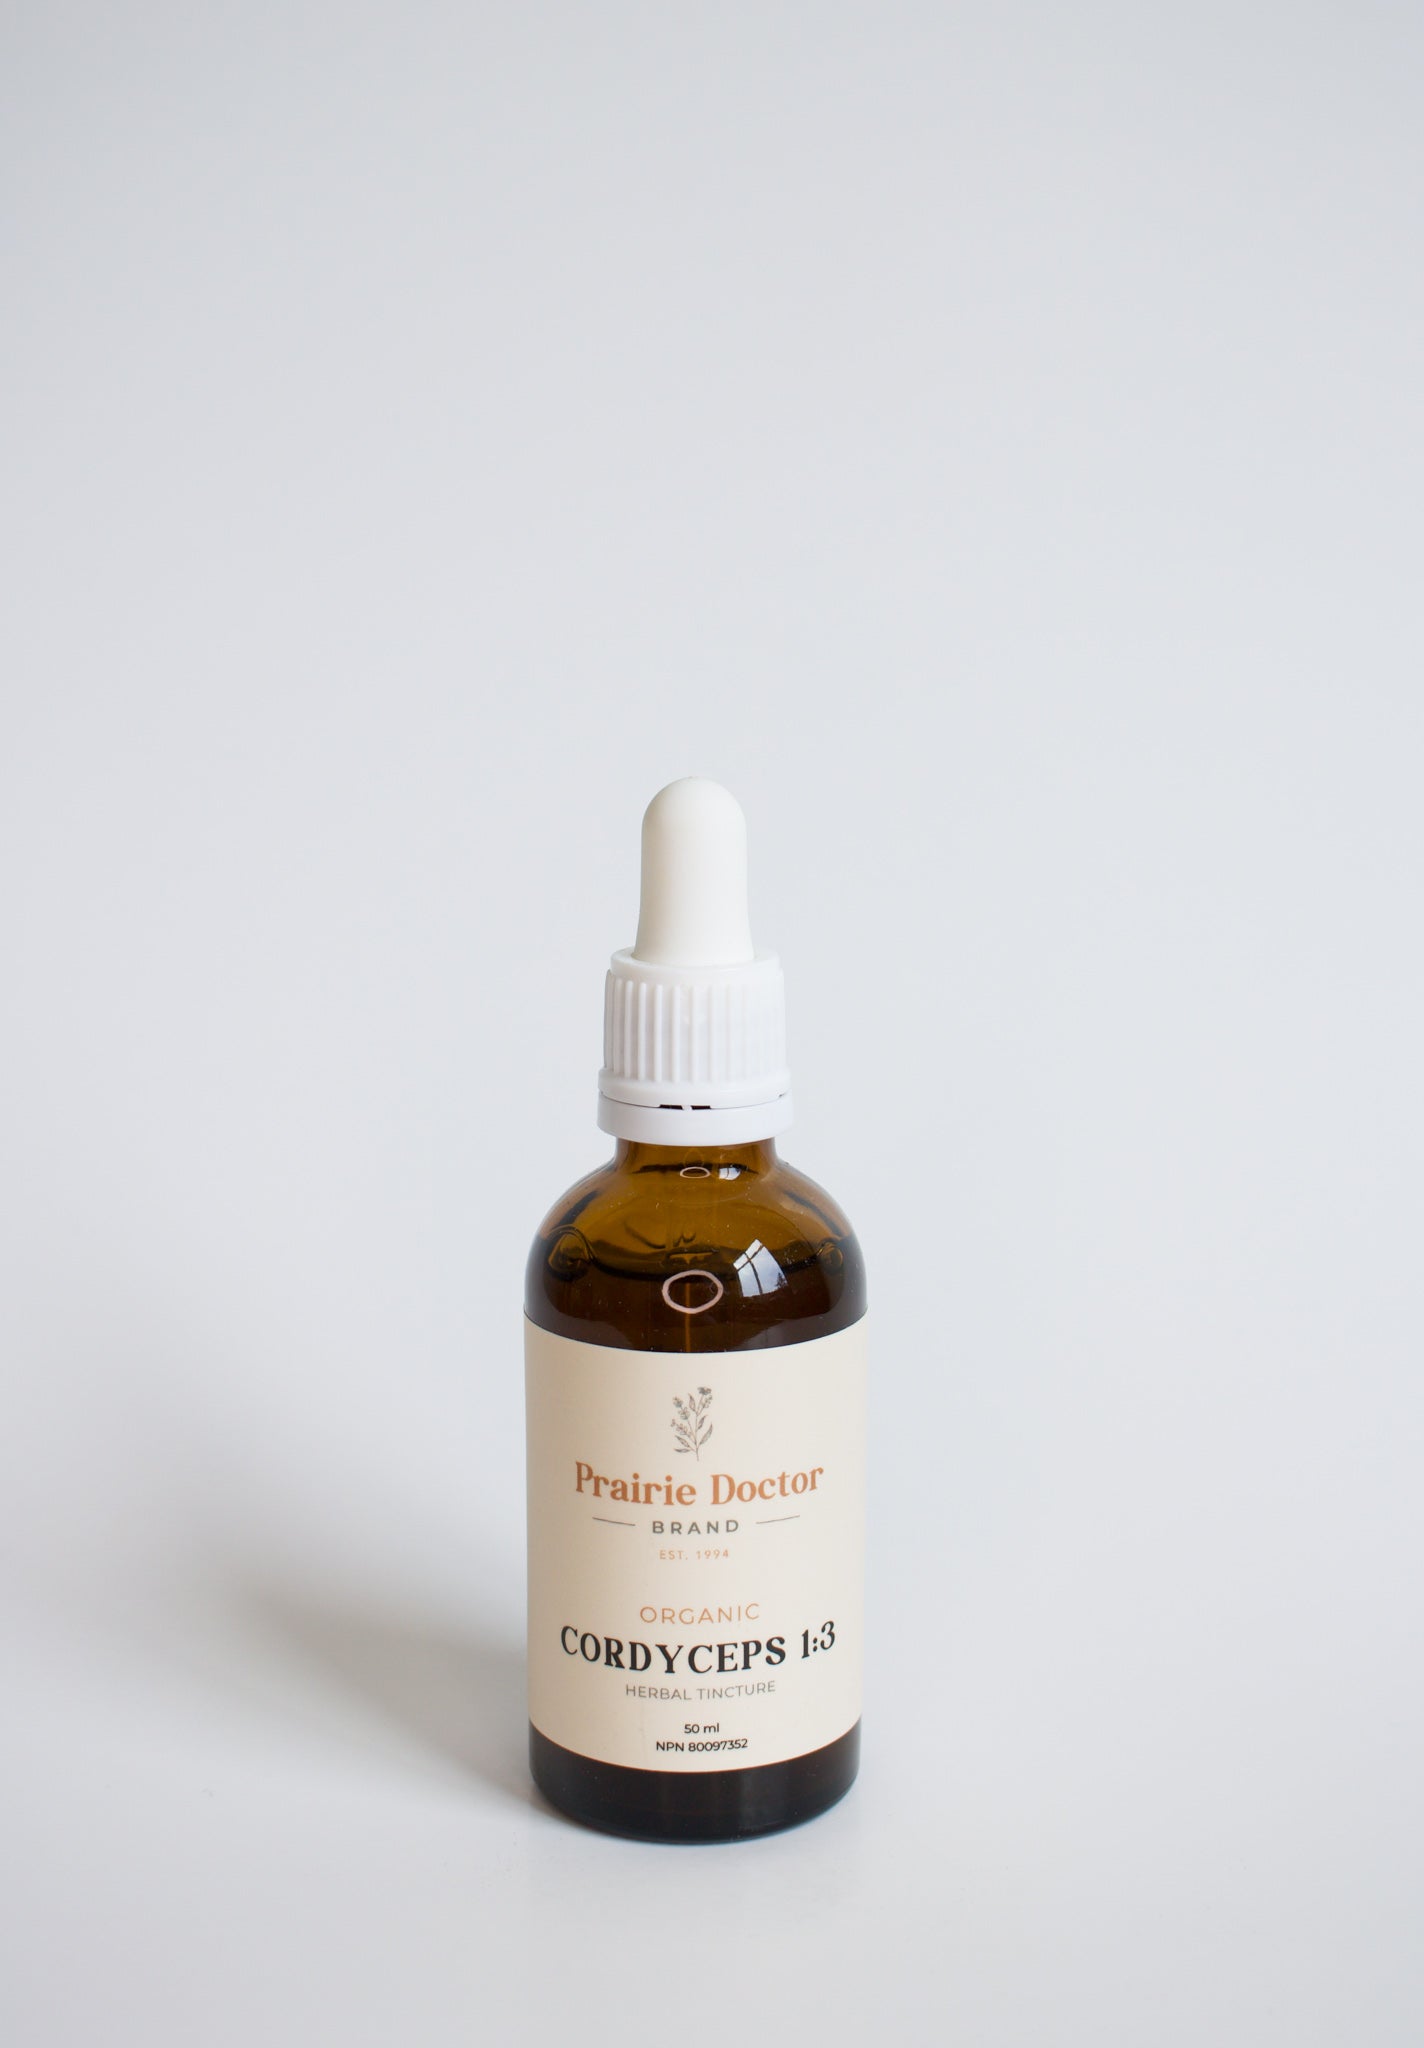 Our organic Cordyceps herbal tincture can be used as a source of fungal polysaccharides with immunomodulating properties.